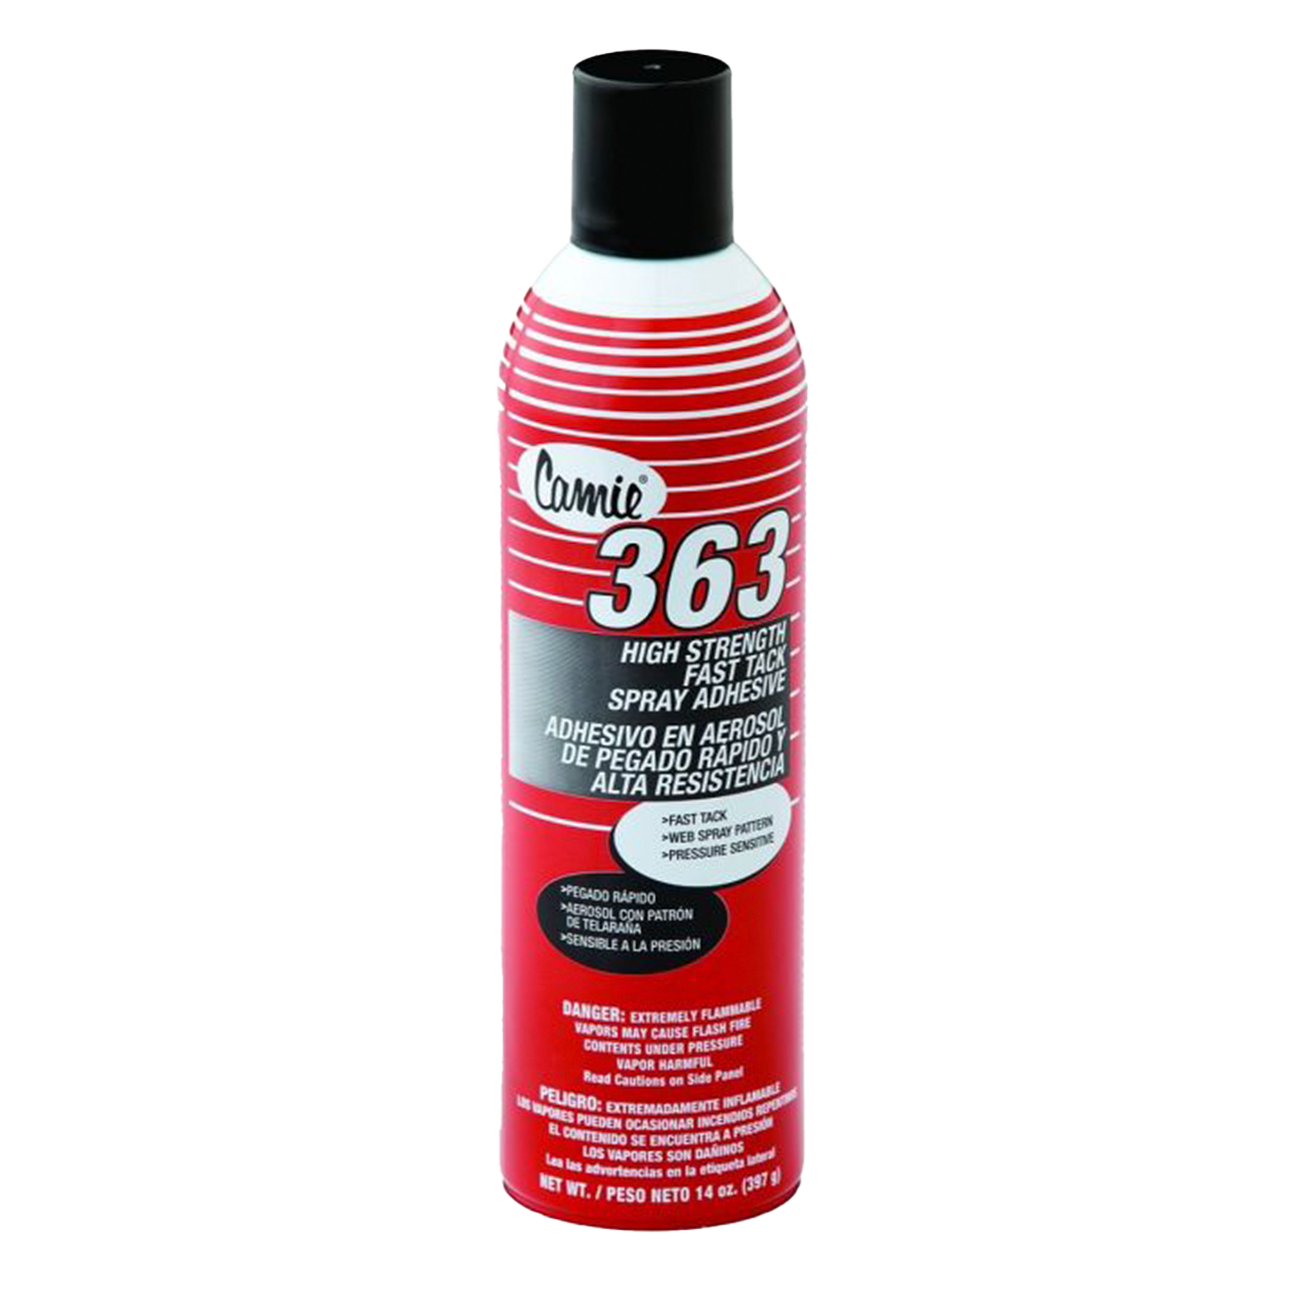 Camie 363 High Strength Fast Tack Spray Adhesive sold by Calhoun's flooring, Springfield, IL